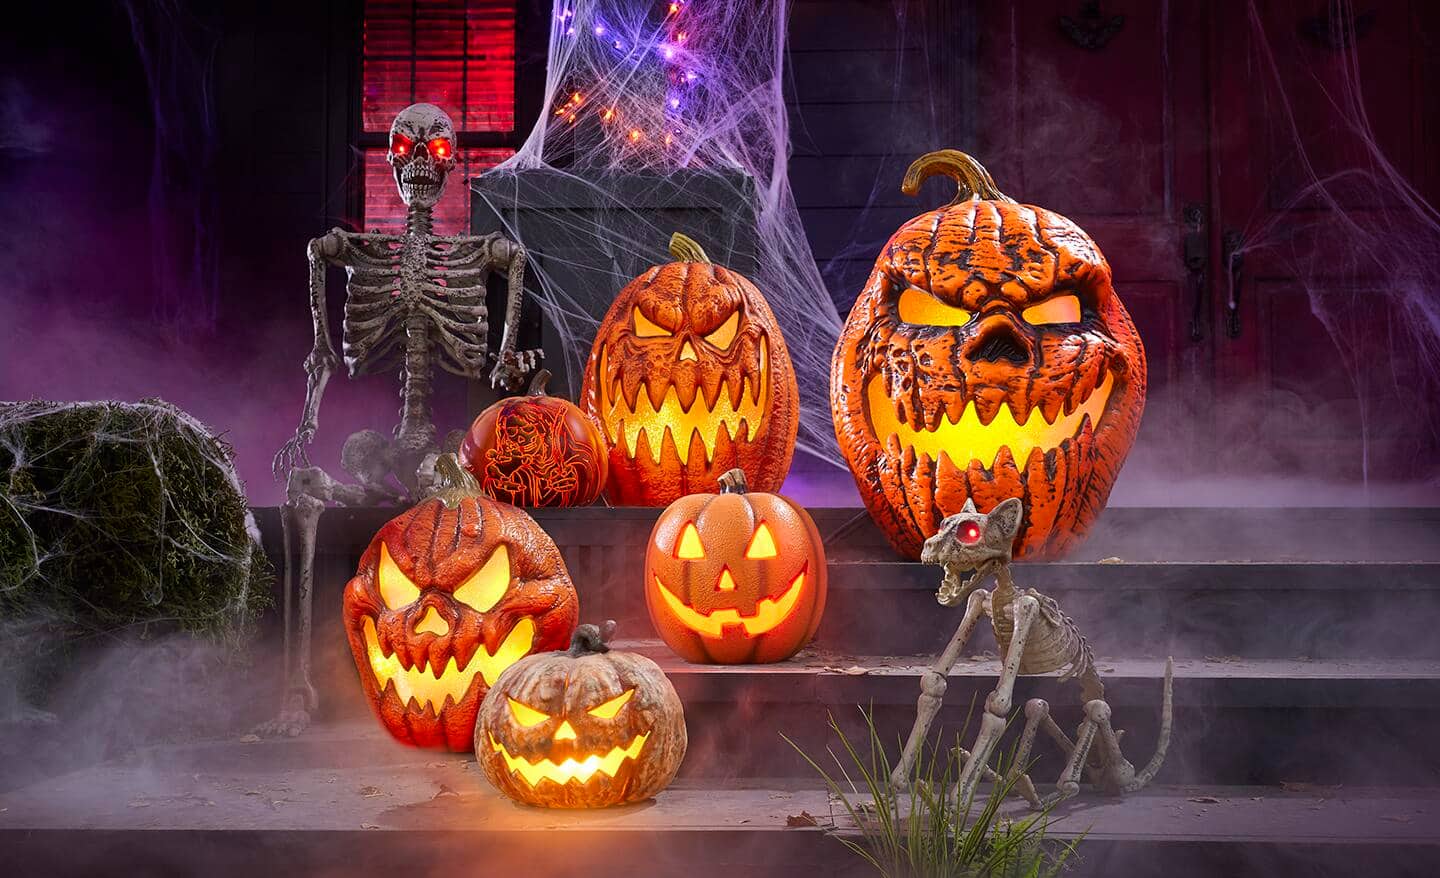 Multiple lit-up Jack-'o'-lanterns sit on a porch decorated for Halloween.